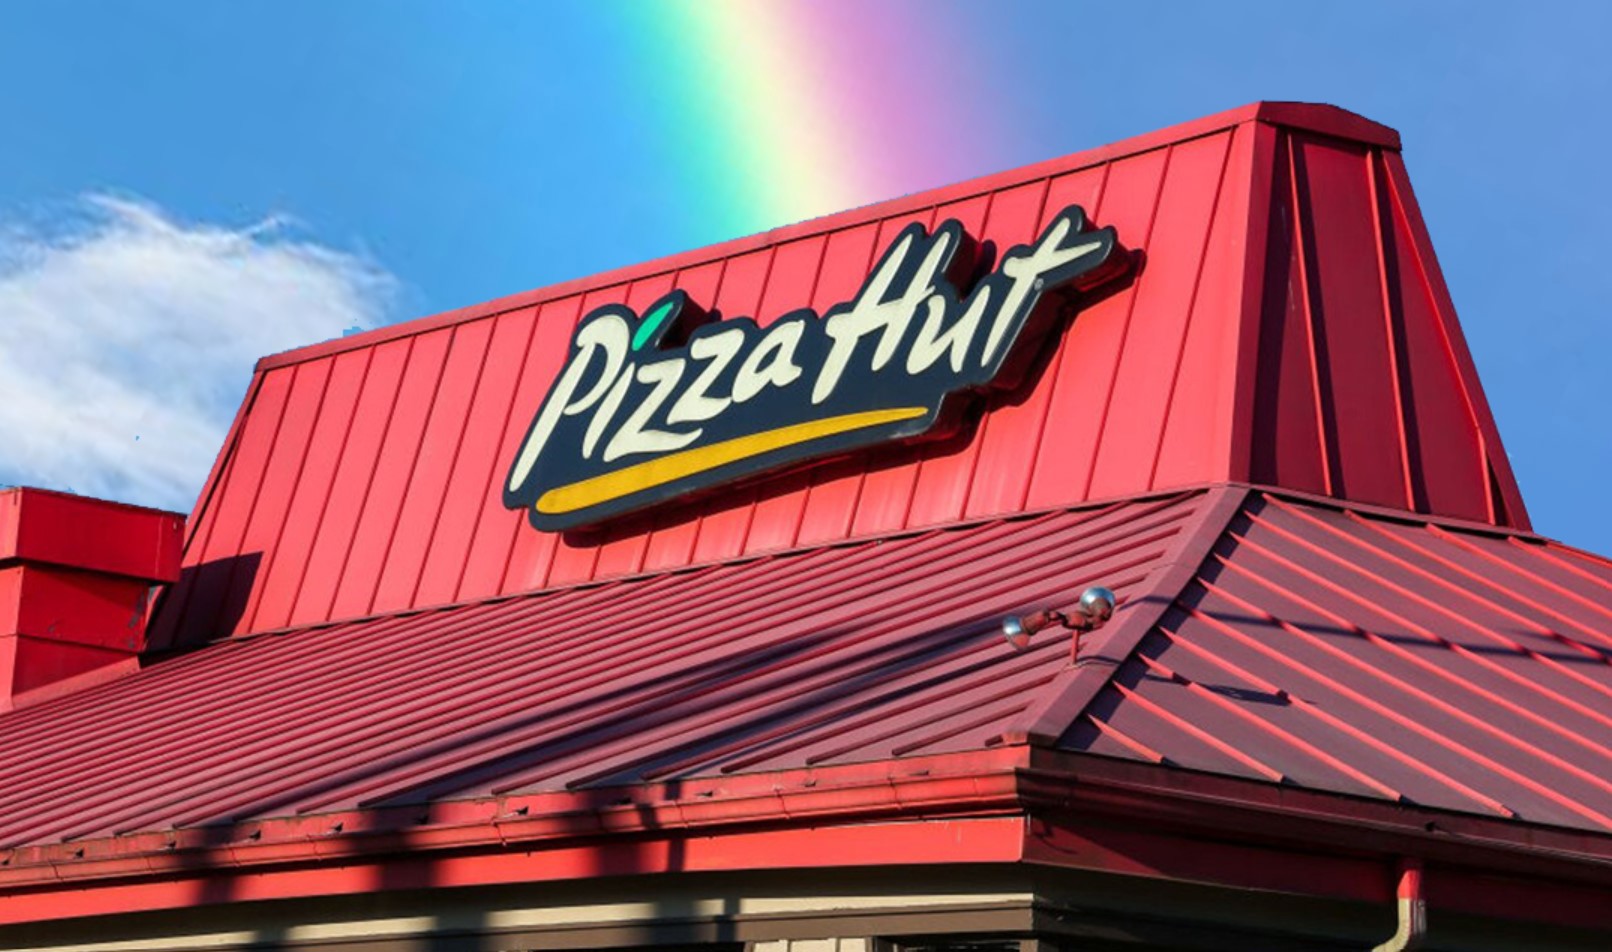 ‘The public expects more’: Pizza Hut slapped with huge fine for spam messages